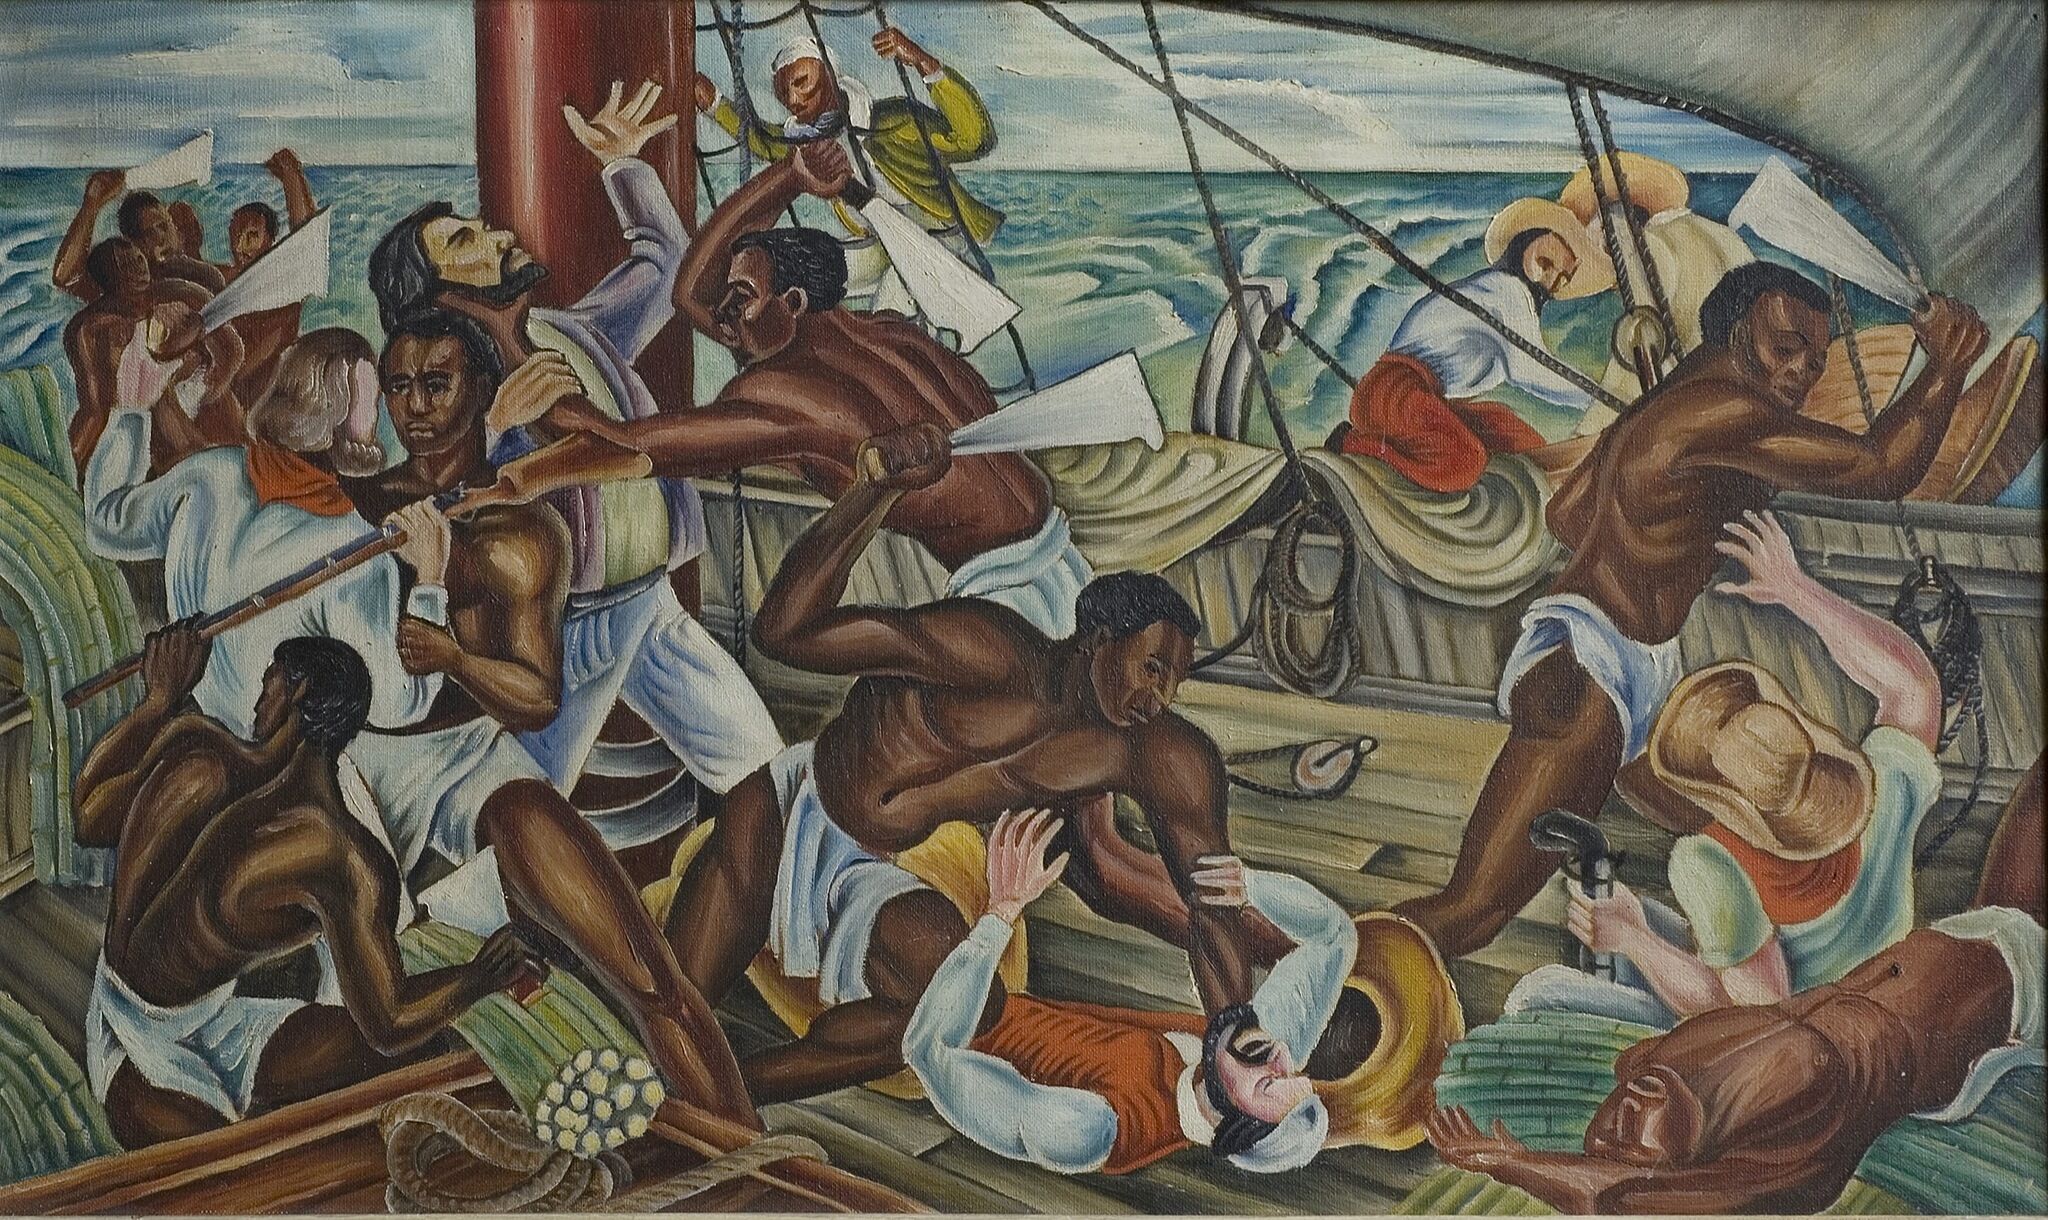 A painting depicting a crowd of people fighting on a ship deck.